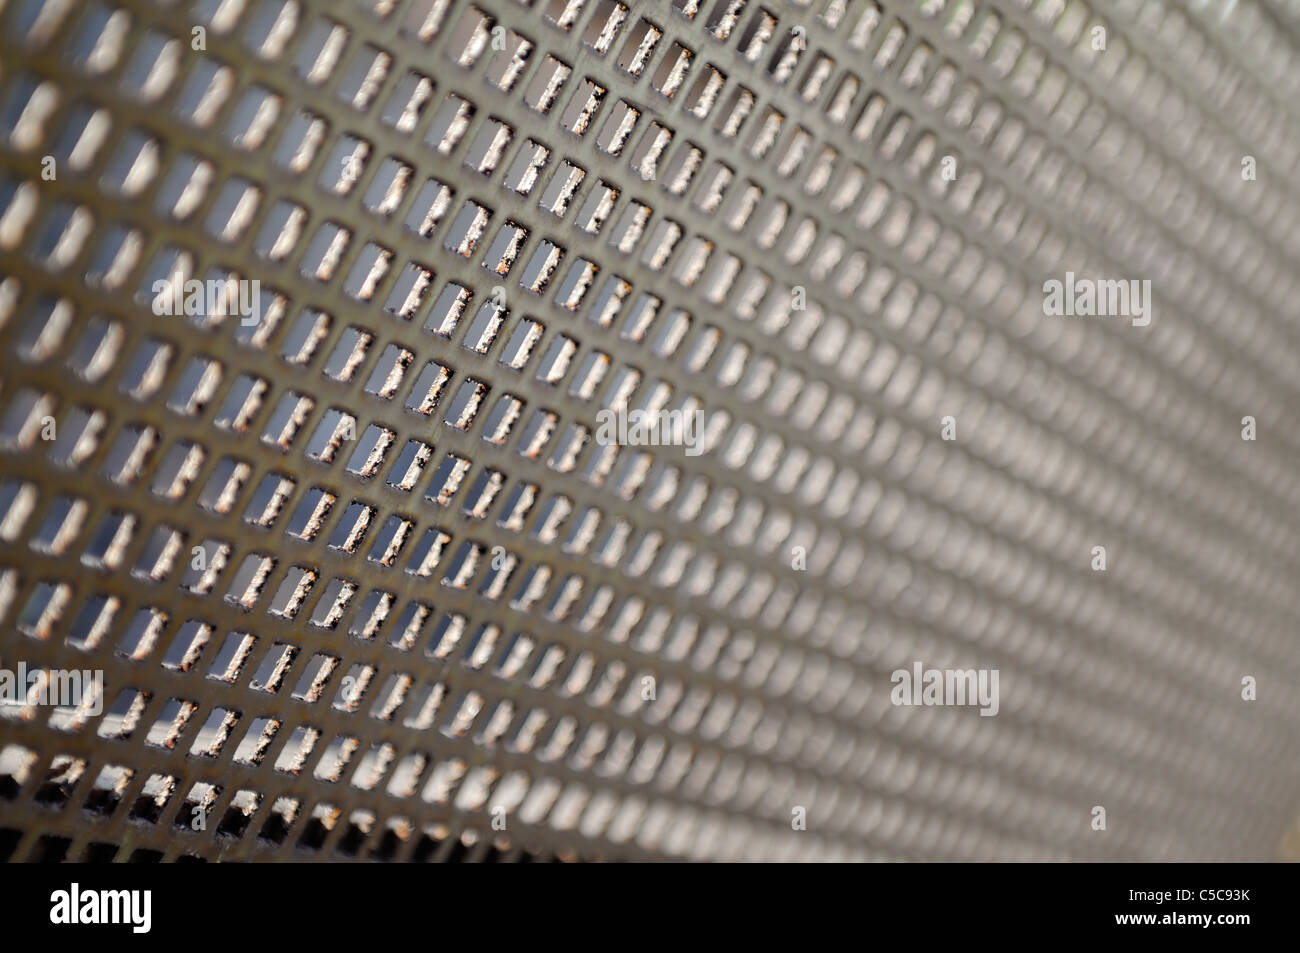 Old metal grid in perspective, short depth of field. Stock Photo